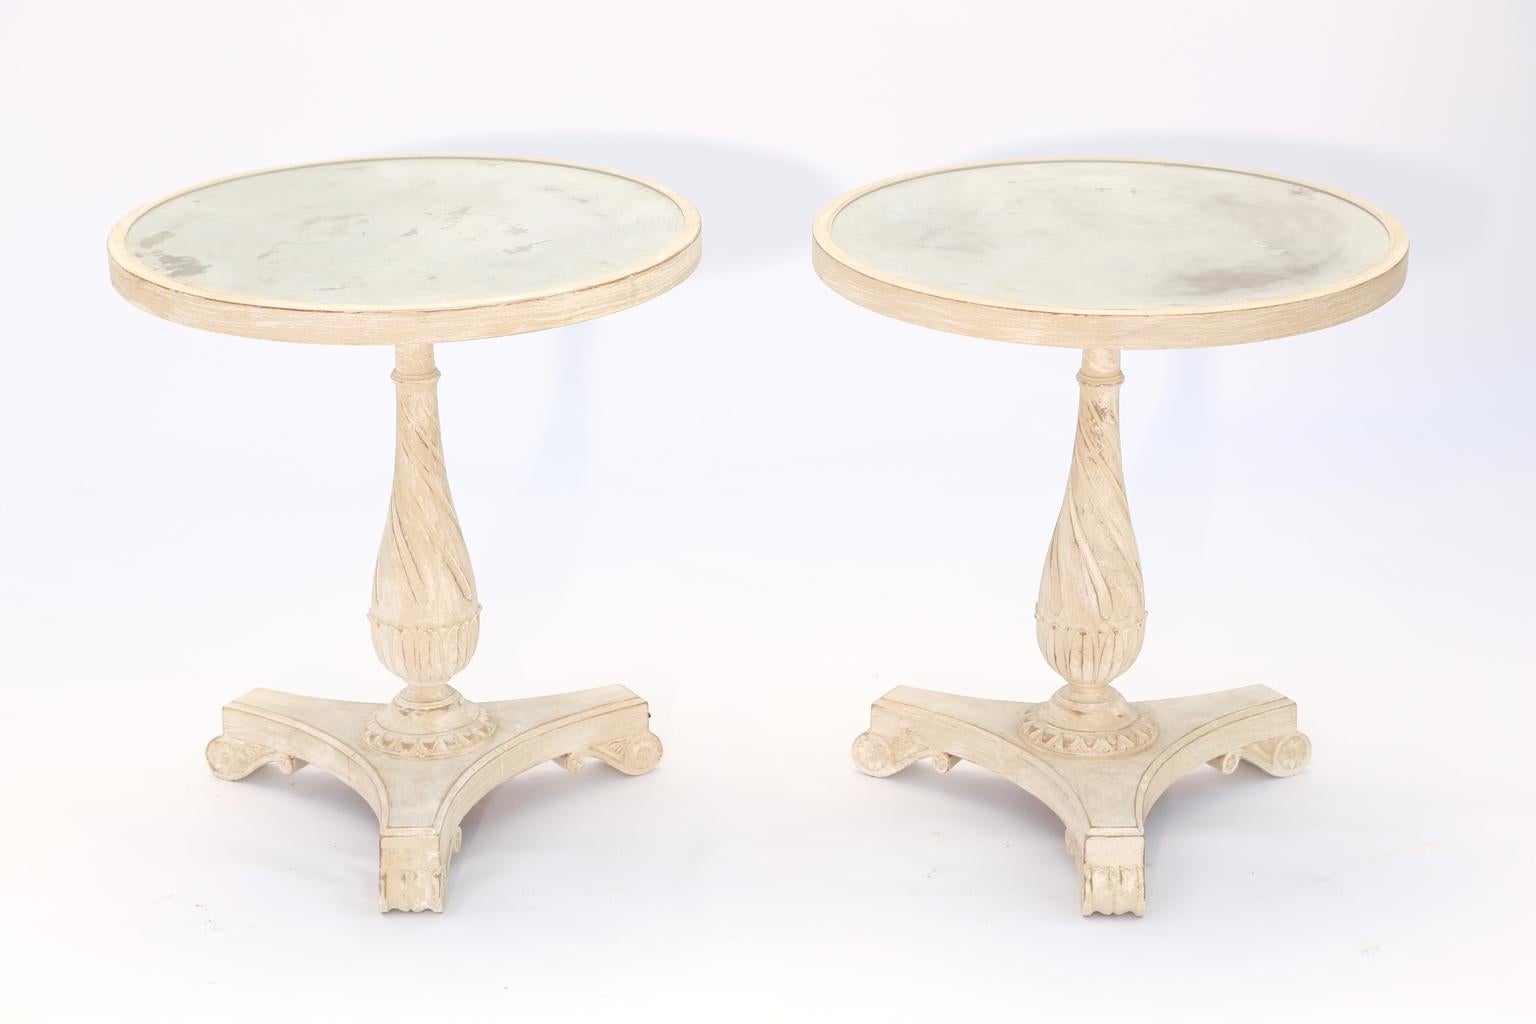 Pair of side tables, having a pickled wood finish; each round top of distressed mirror plate, set upon a baluster-form, spiral-turned, pedestal base, on a concave, tripartite base, raised on scroll feet. 

Stock ID: D1694.